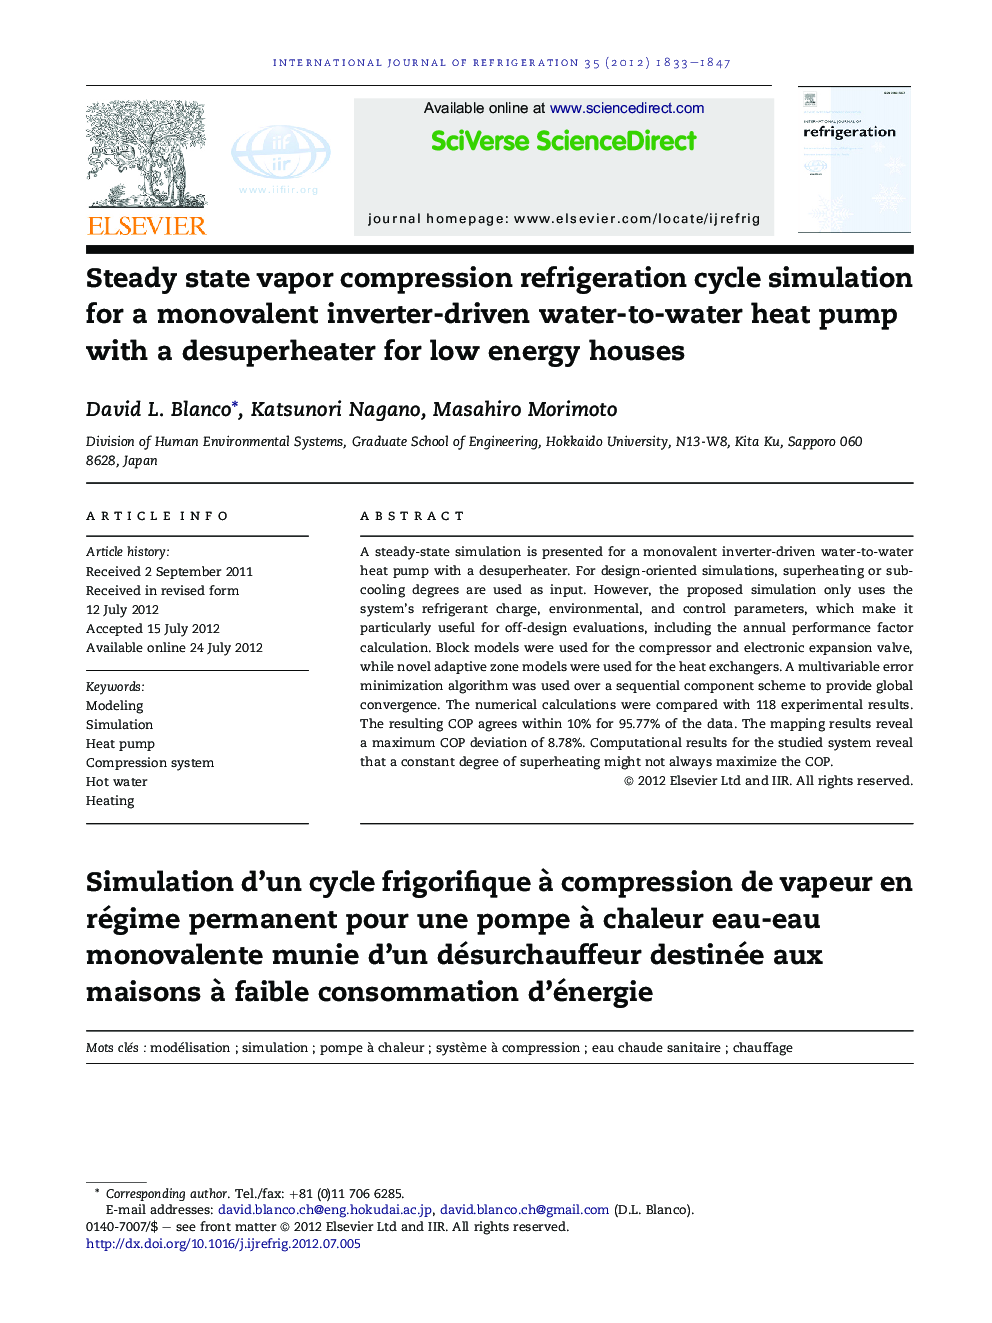 Steady state vapor compression refrigeration cycle simulation for a monovalent inverter-driven water-to-water heat pump with a desuperheater for low energy houses